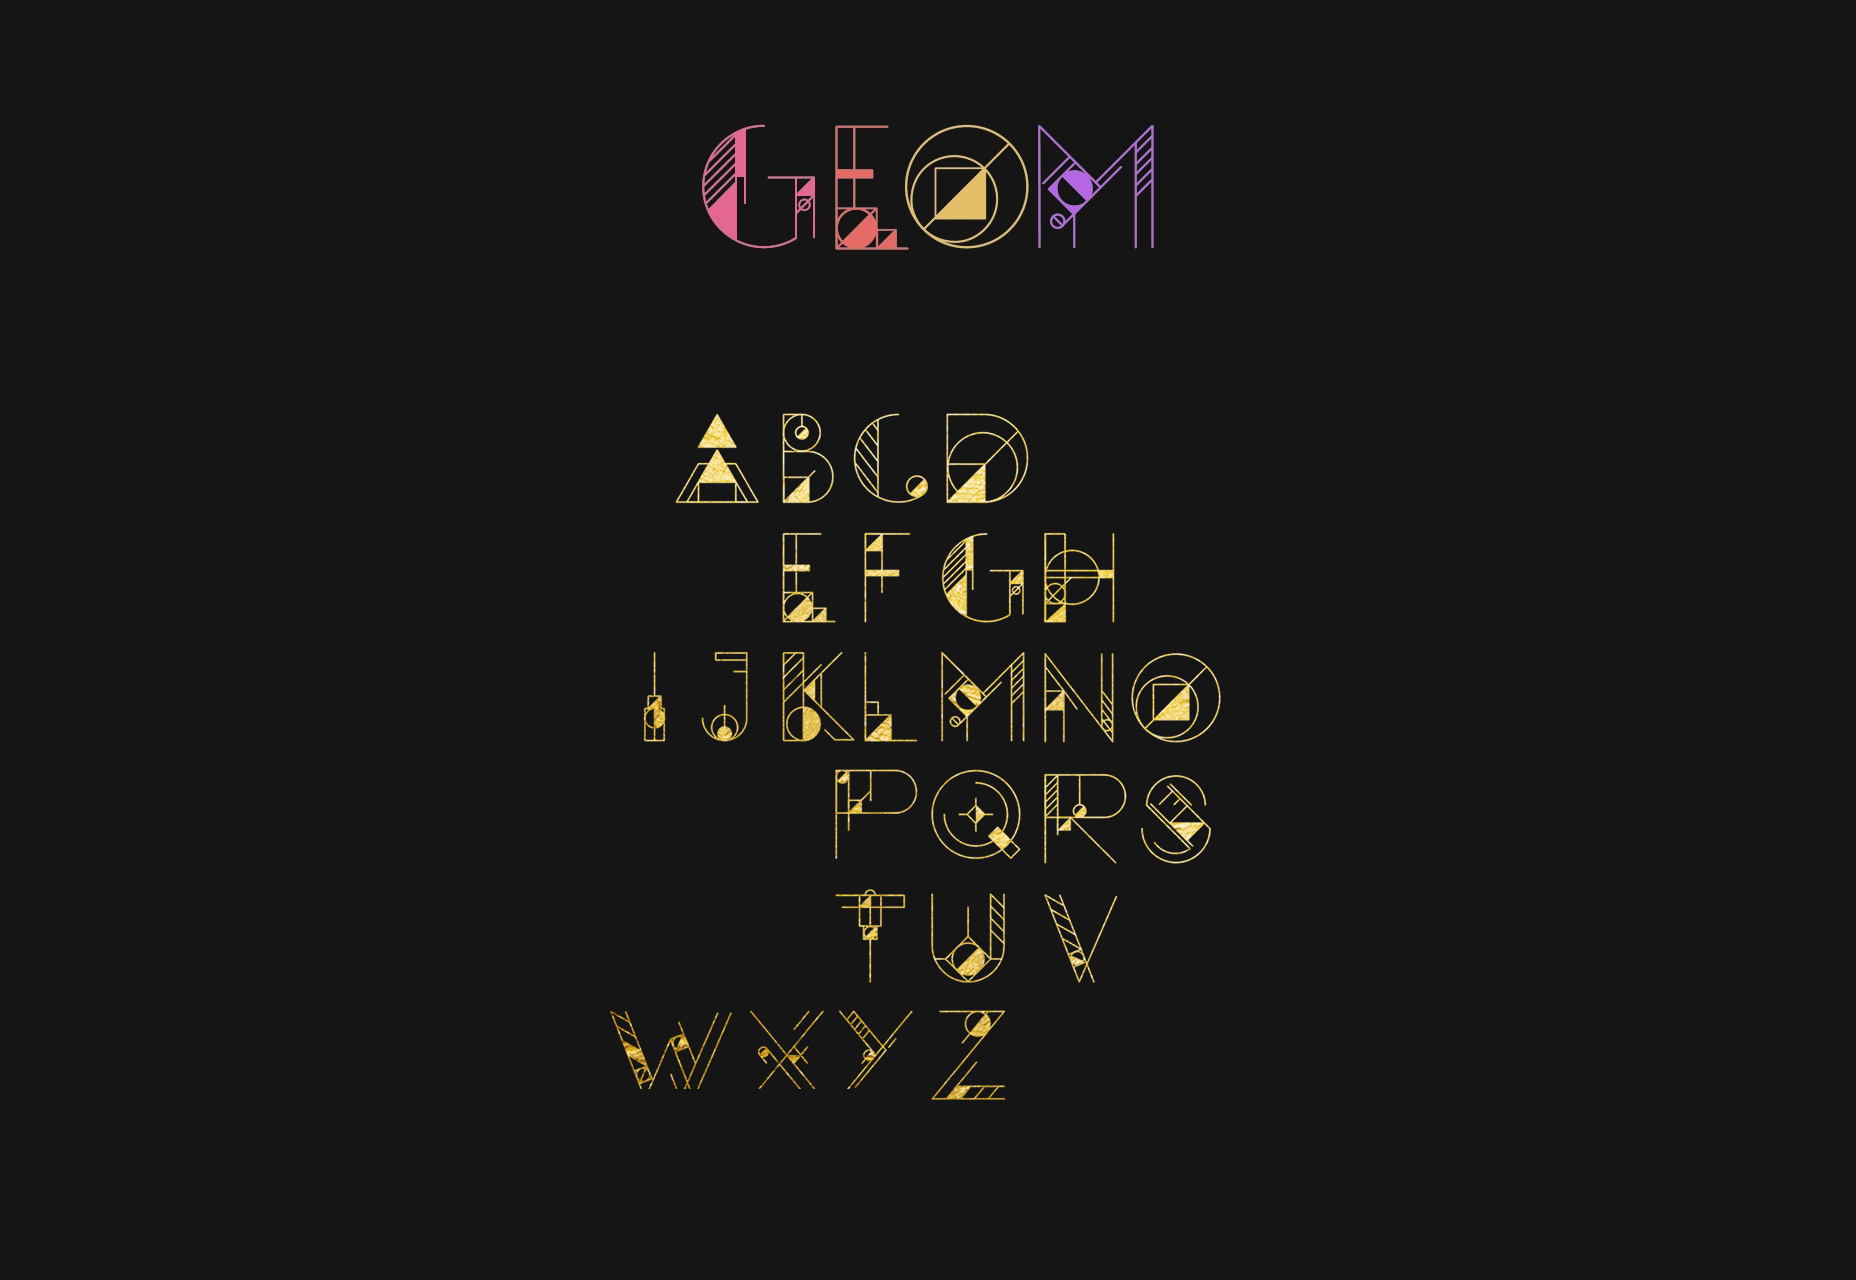 geom-display-an-fully-geometrically-adorned-typeface